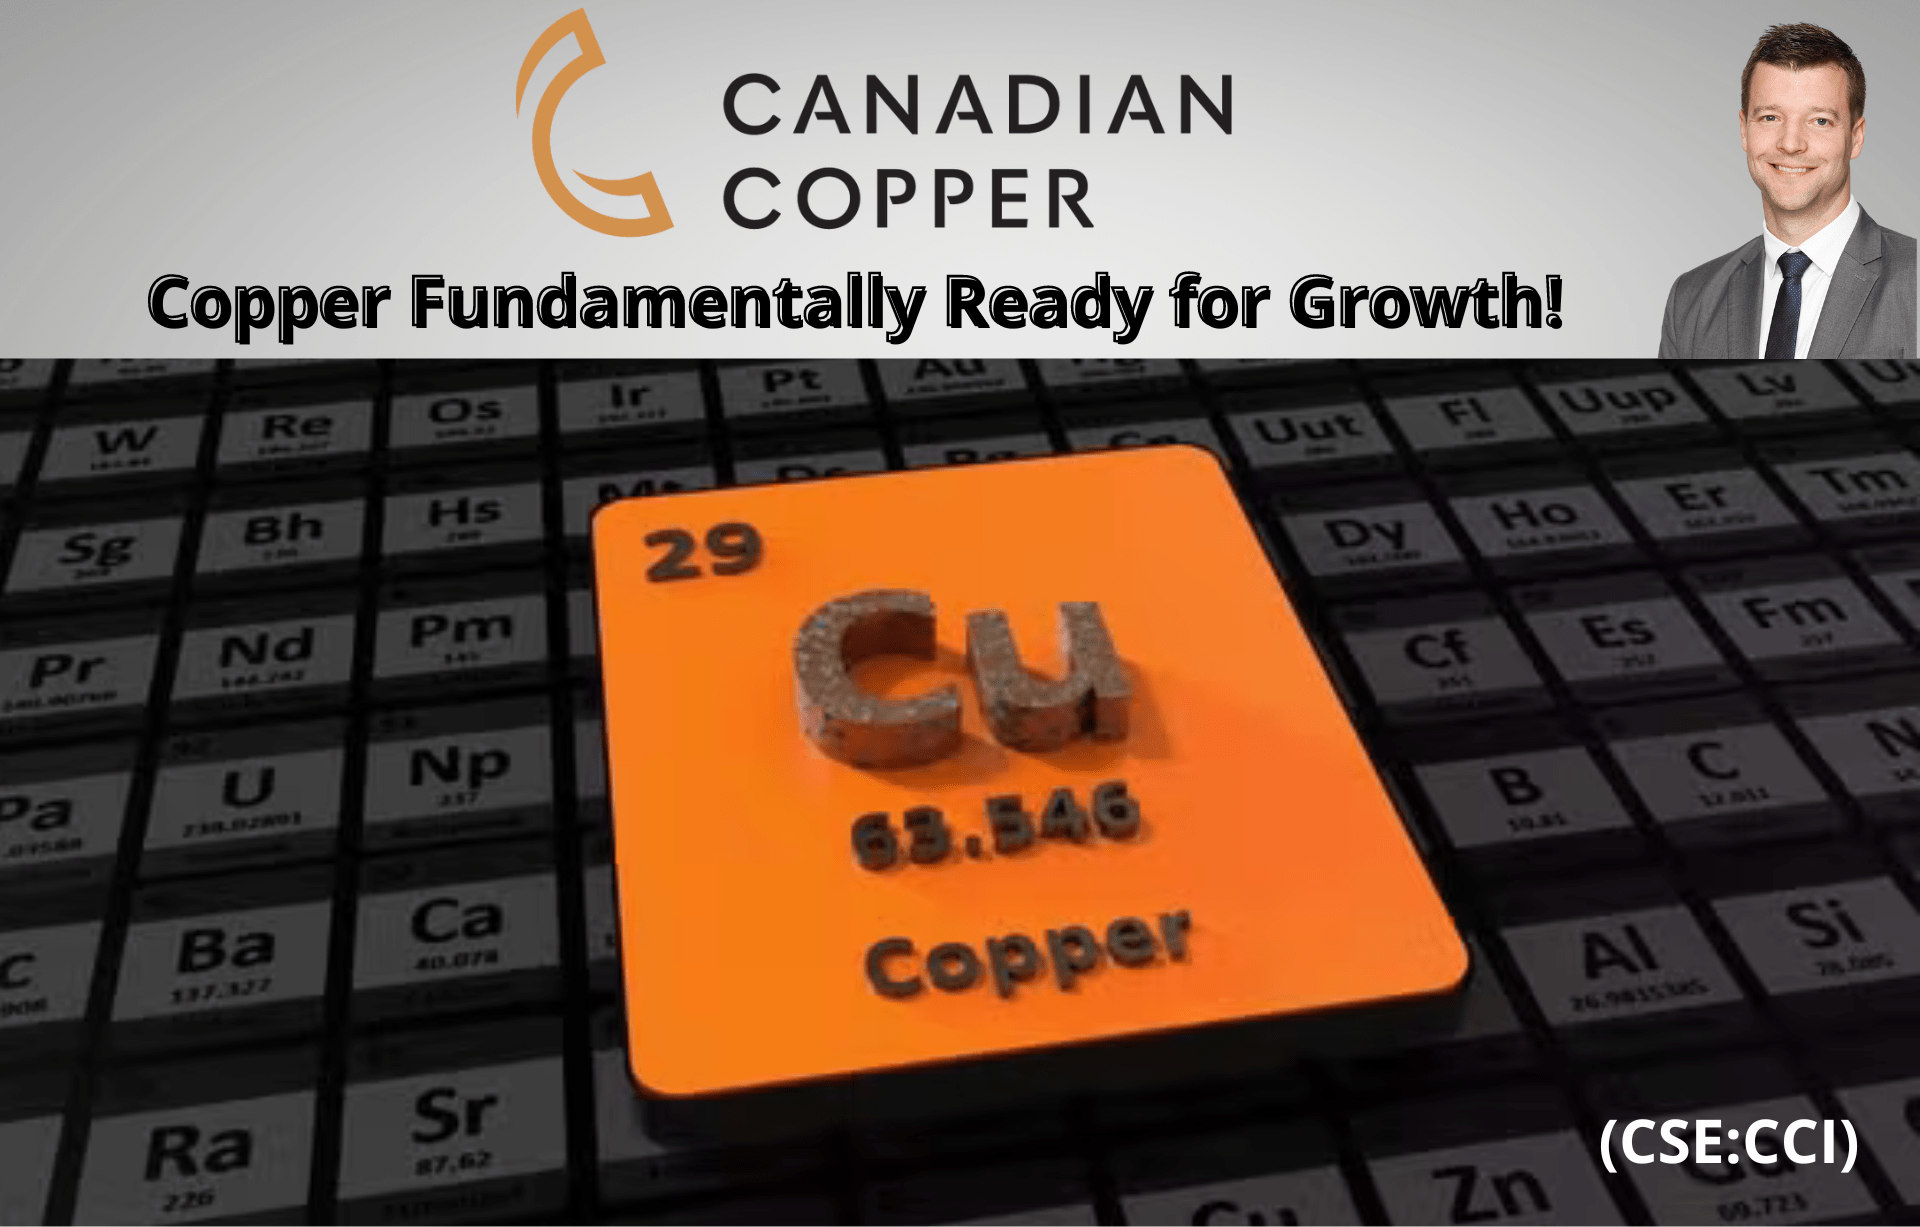 EP.29:Copper Fundamentally Ready for Growth! &#8211; Insight from Canadian Copper CEO